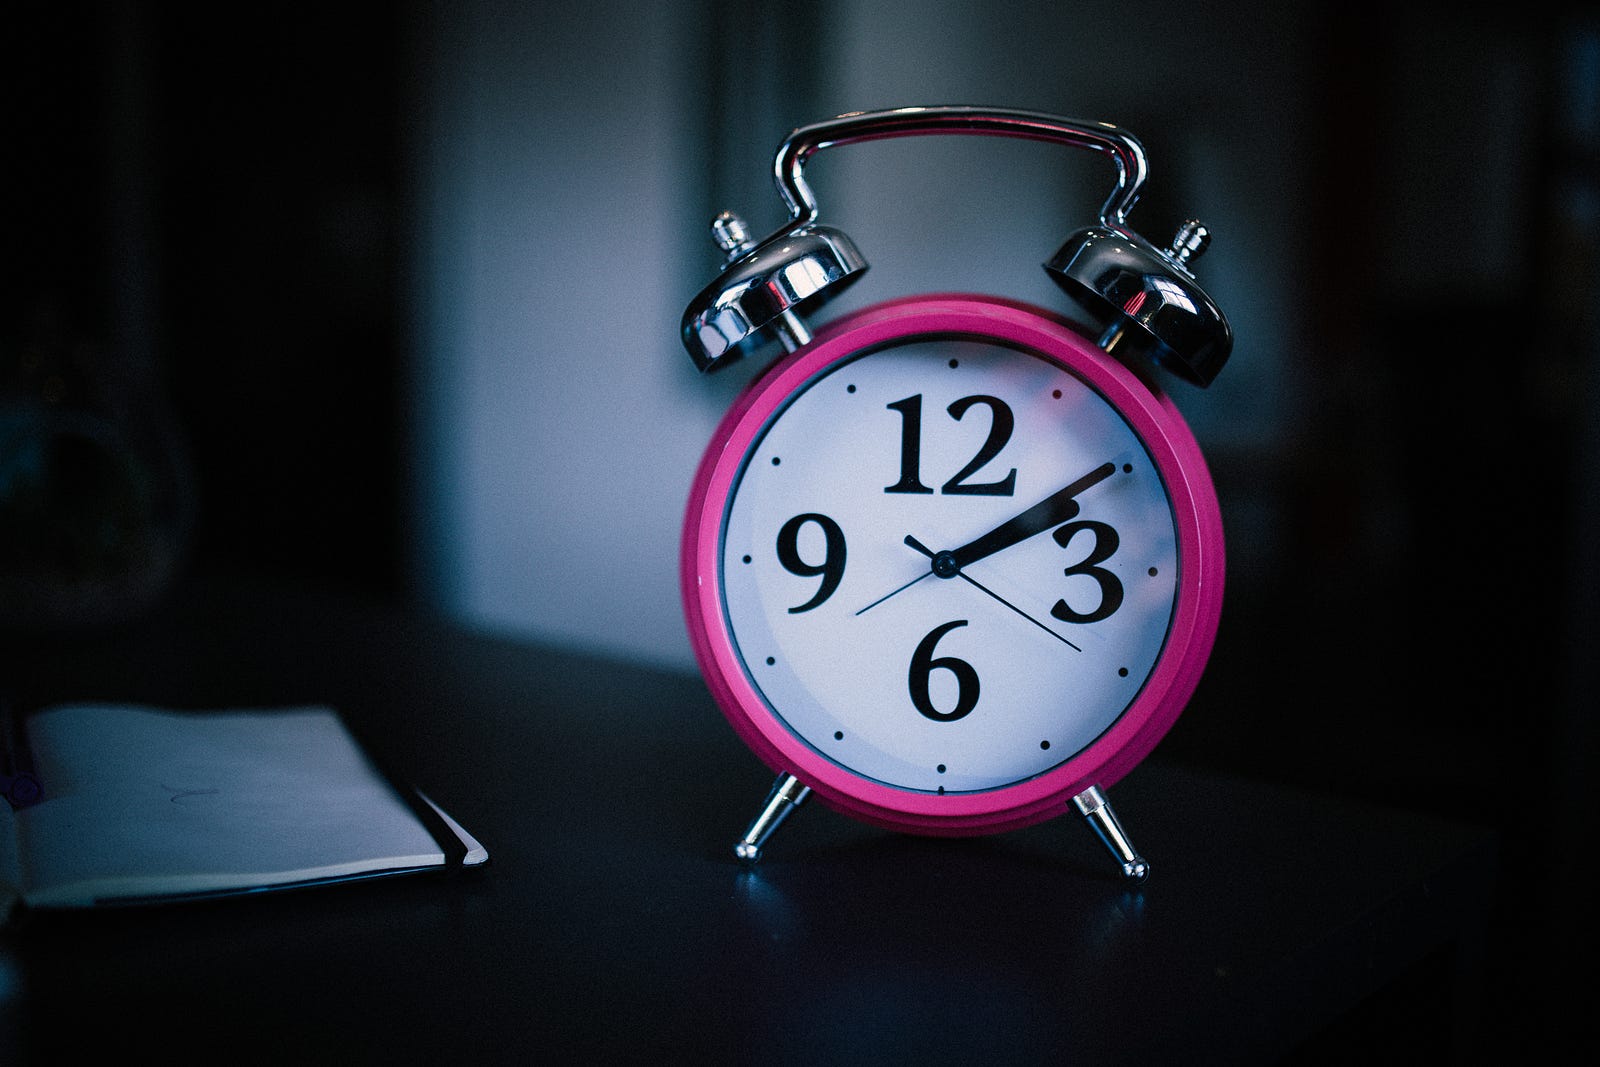 An old-fashioned clock with a white face, black numbers, and two silver bells on top. 2013 PLOS One study illustrates the promise of melatonin for sleep problems. The analysis combined results from 19 studies (including 1,683 women and men). Here are the findings: Those taking melatonin supplements fell asleep seven minutes faster and increased overall sleep time by eight minutes.